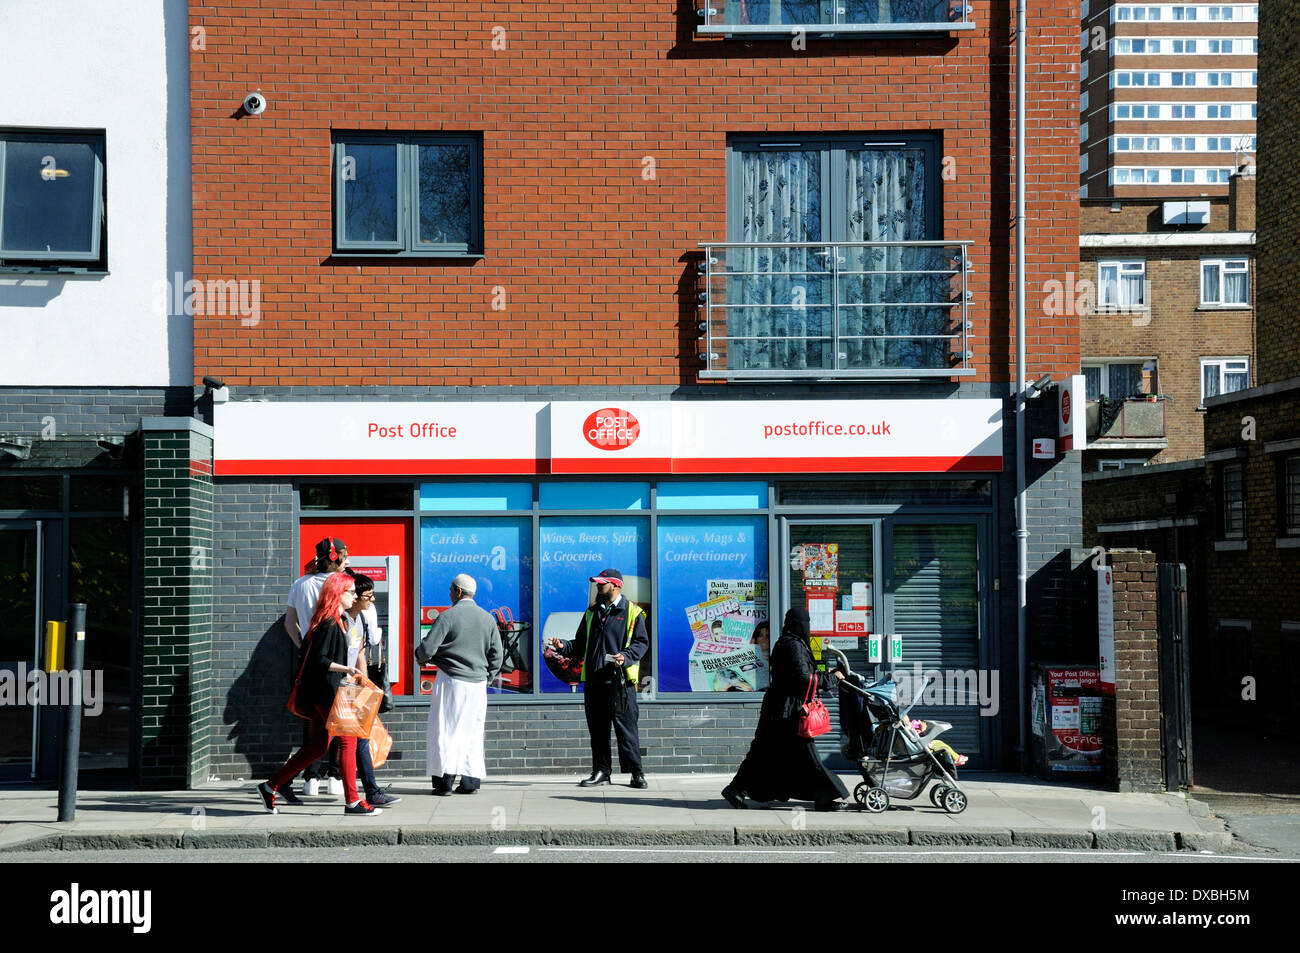 Post Office with people passing, Burdett Road, Mile End, London Borough of Tower Hamlets, England UK Stock Photo